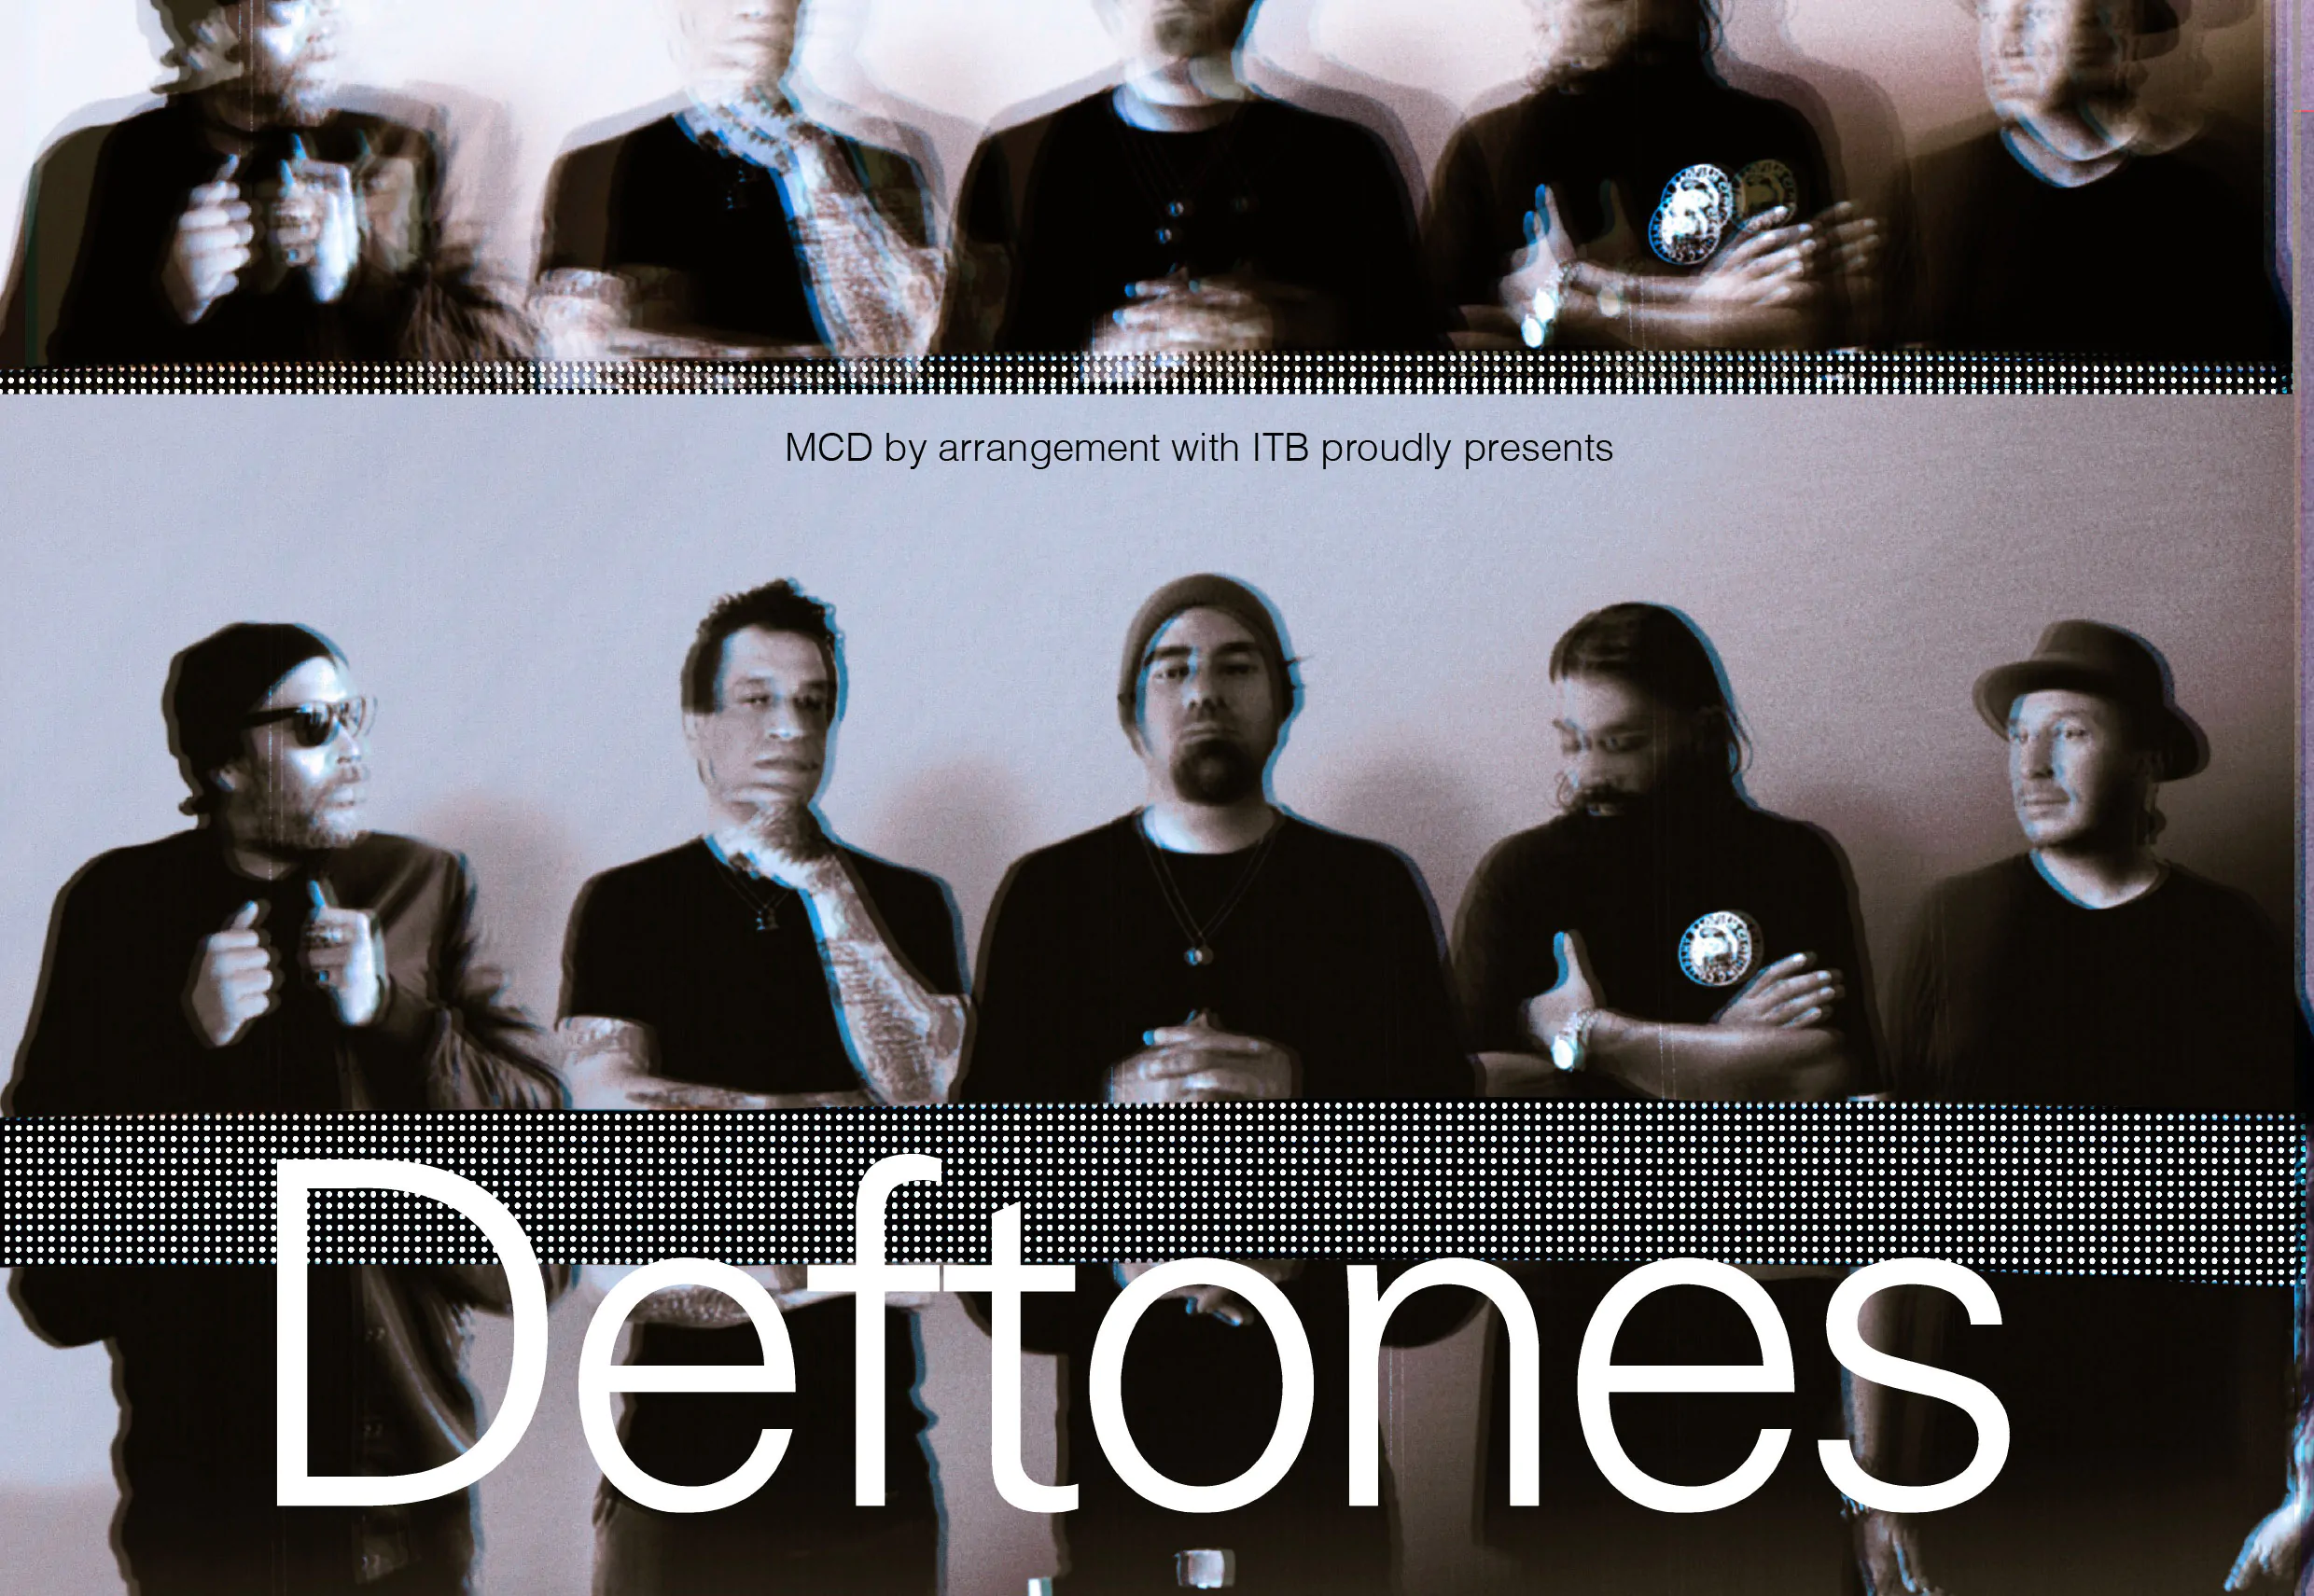 WIN: Tickets to see DEFTONES with special guests GOJIRA at 3Arena, Dublin on 6th June 2021